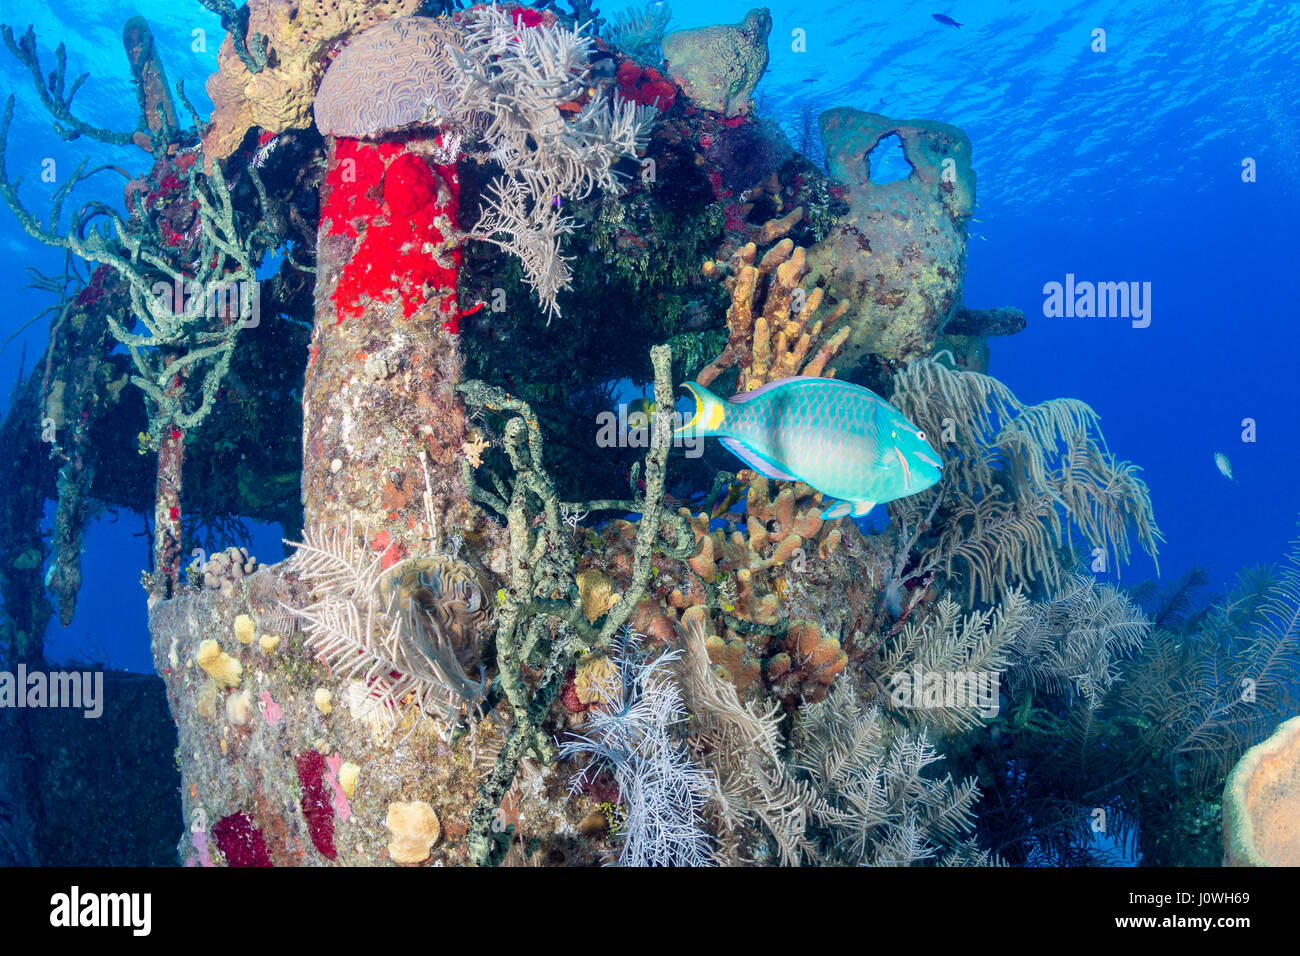 Parrotfish and corals on an old underwater shipwreck Stock Photo